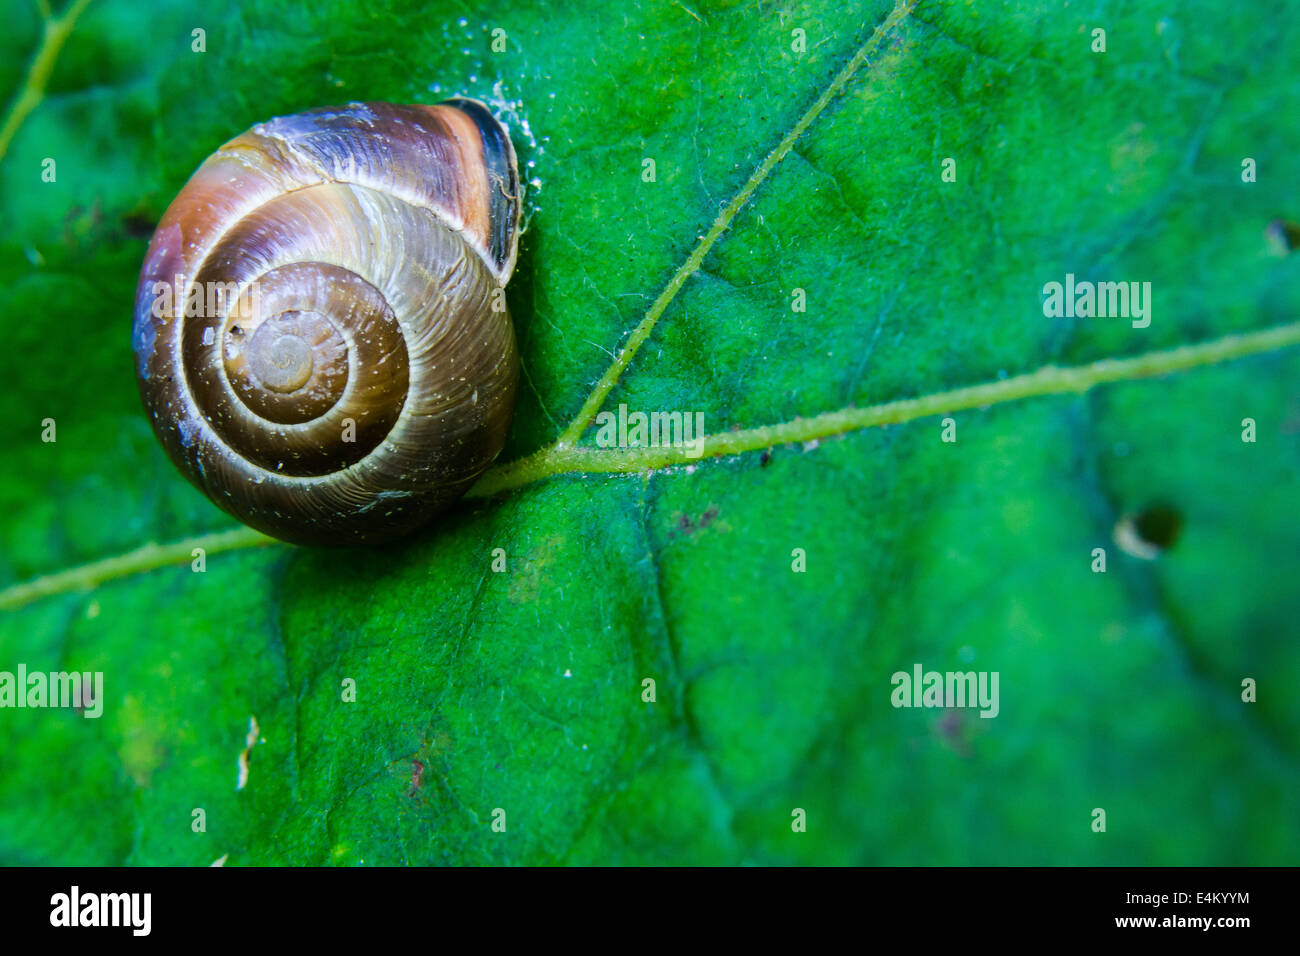 Snail and leaf Stock Photo